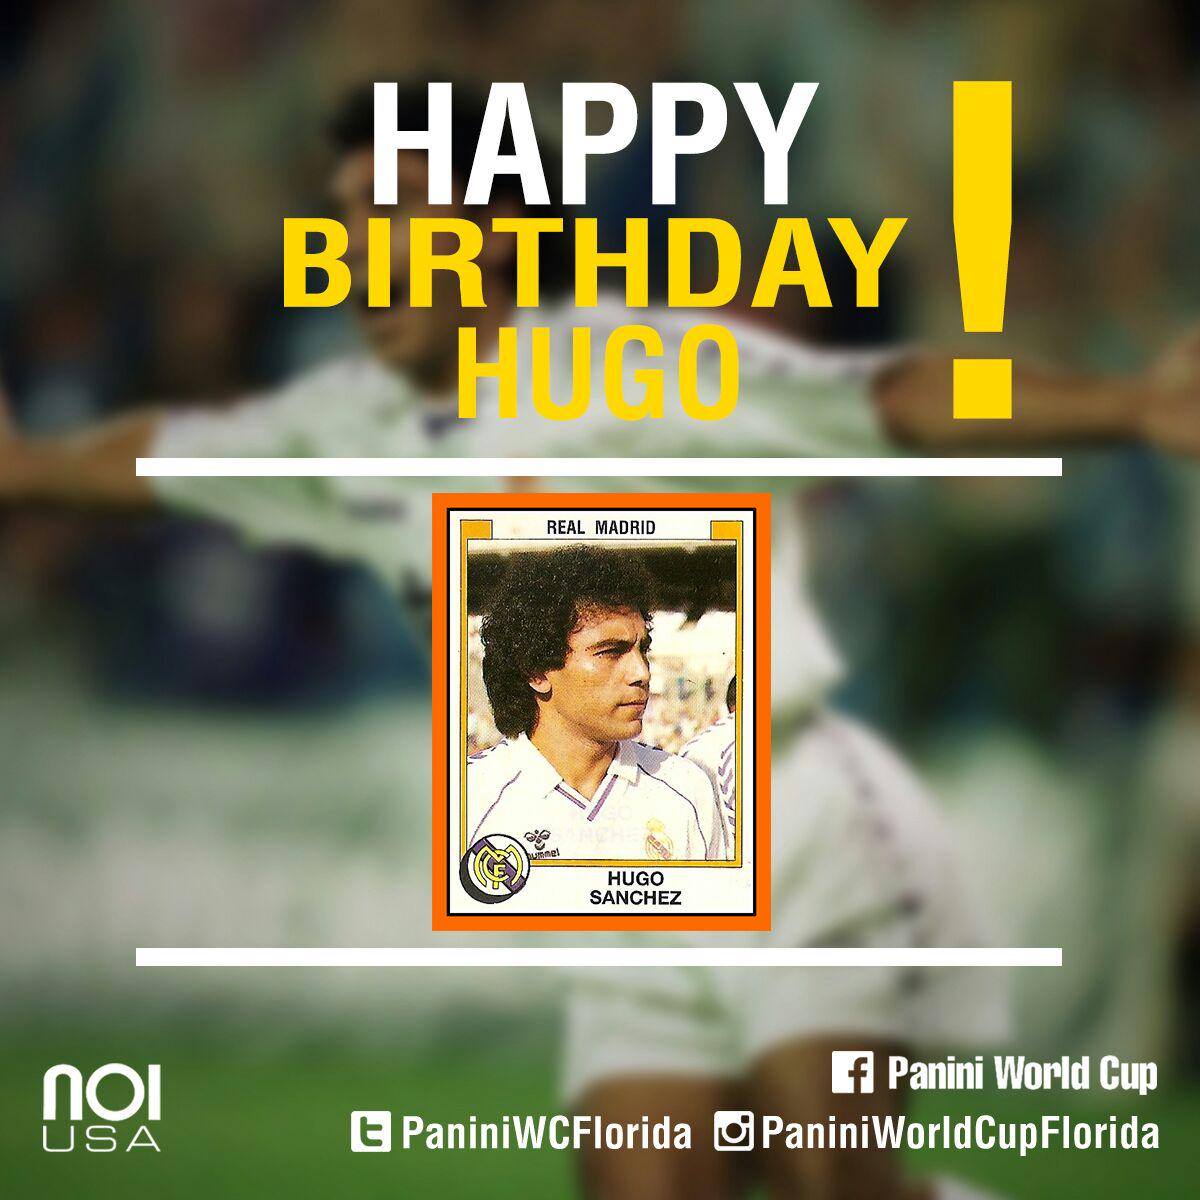 Hugo Sánchez! The legend!
Happy birthday!!
Do you think this is the best mexican player of all time? 